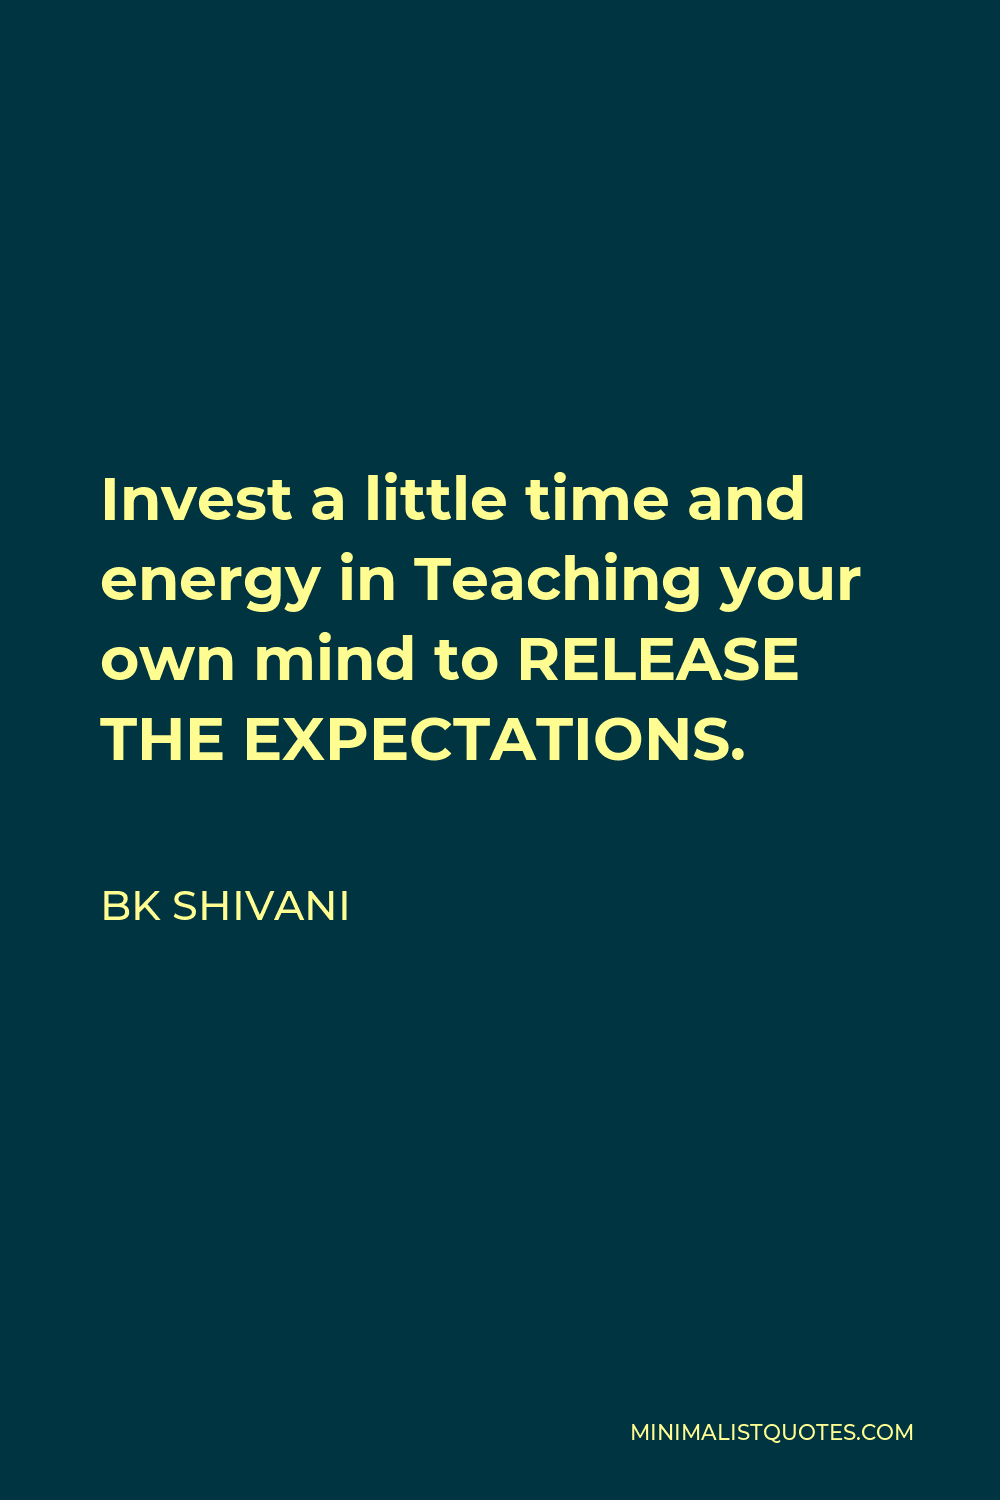 BK Shivani Quote - Invest a little time and energy in Teaching your own mind to RELEASE THE EXPECTATIONS.